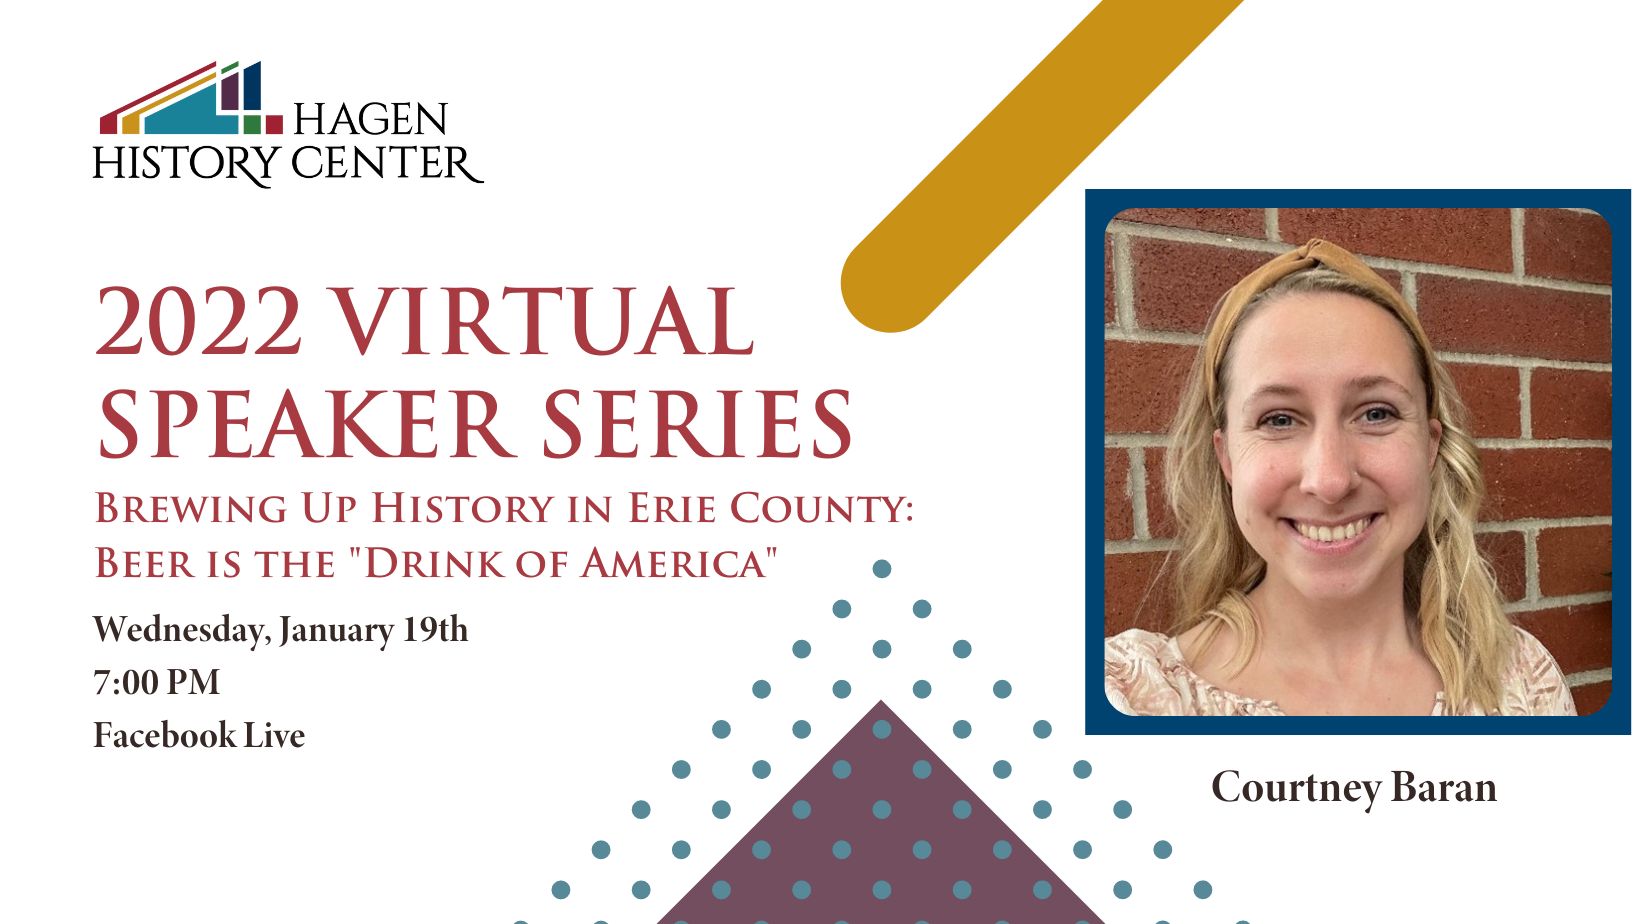 Hagen History Center 2022 Virtual Speaker Series - Brewing Up History in Erie County: Beer is the "Drink of America"